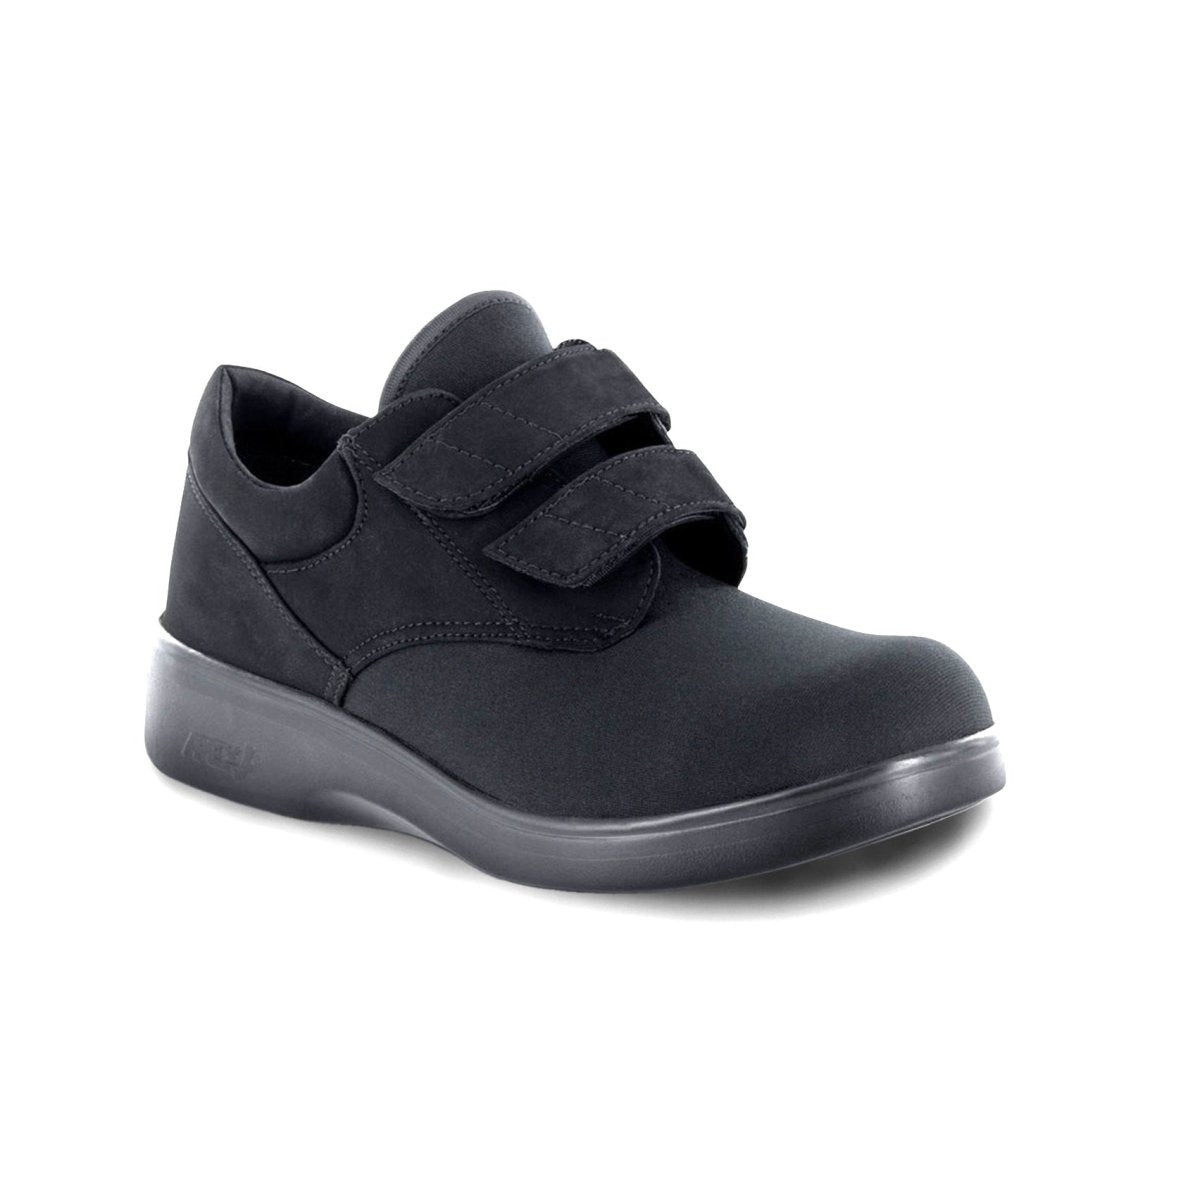 APEX 1200 AMB STRETCHER DOUBLE STRAP UNISEX CASUAL SHOE IN BLACK VEL - TLW Shoes